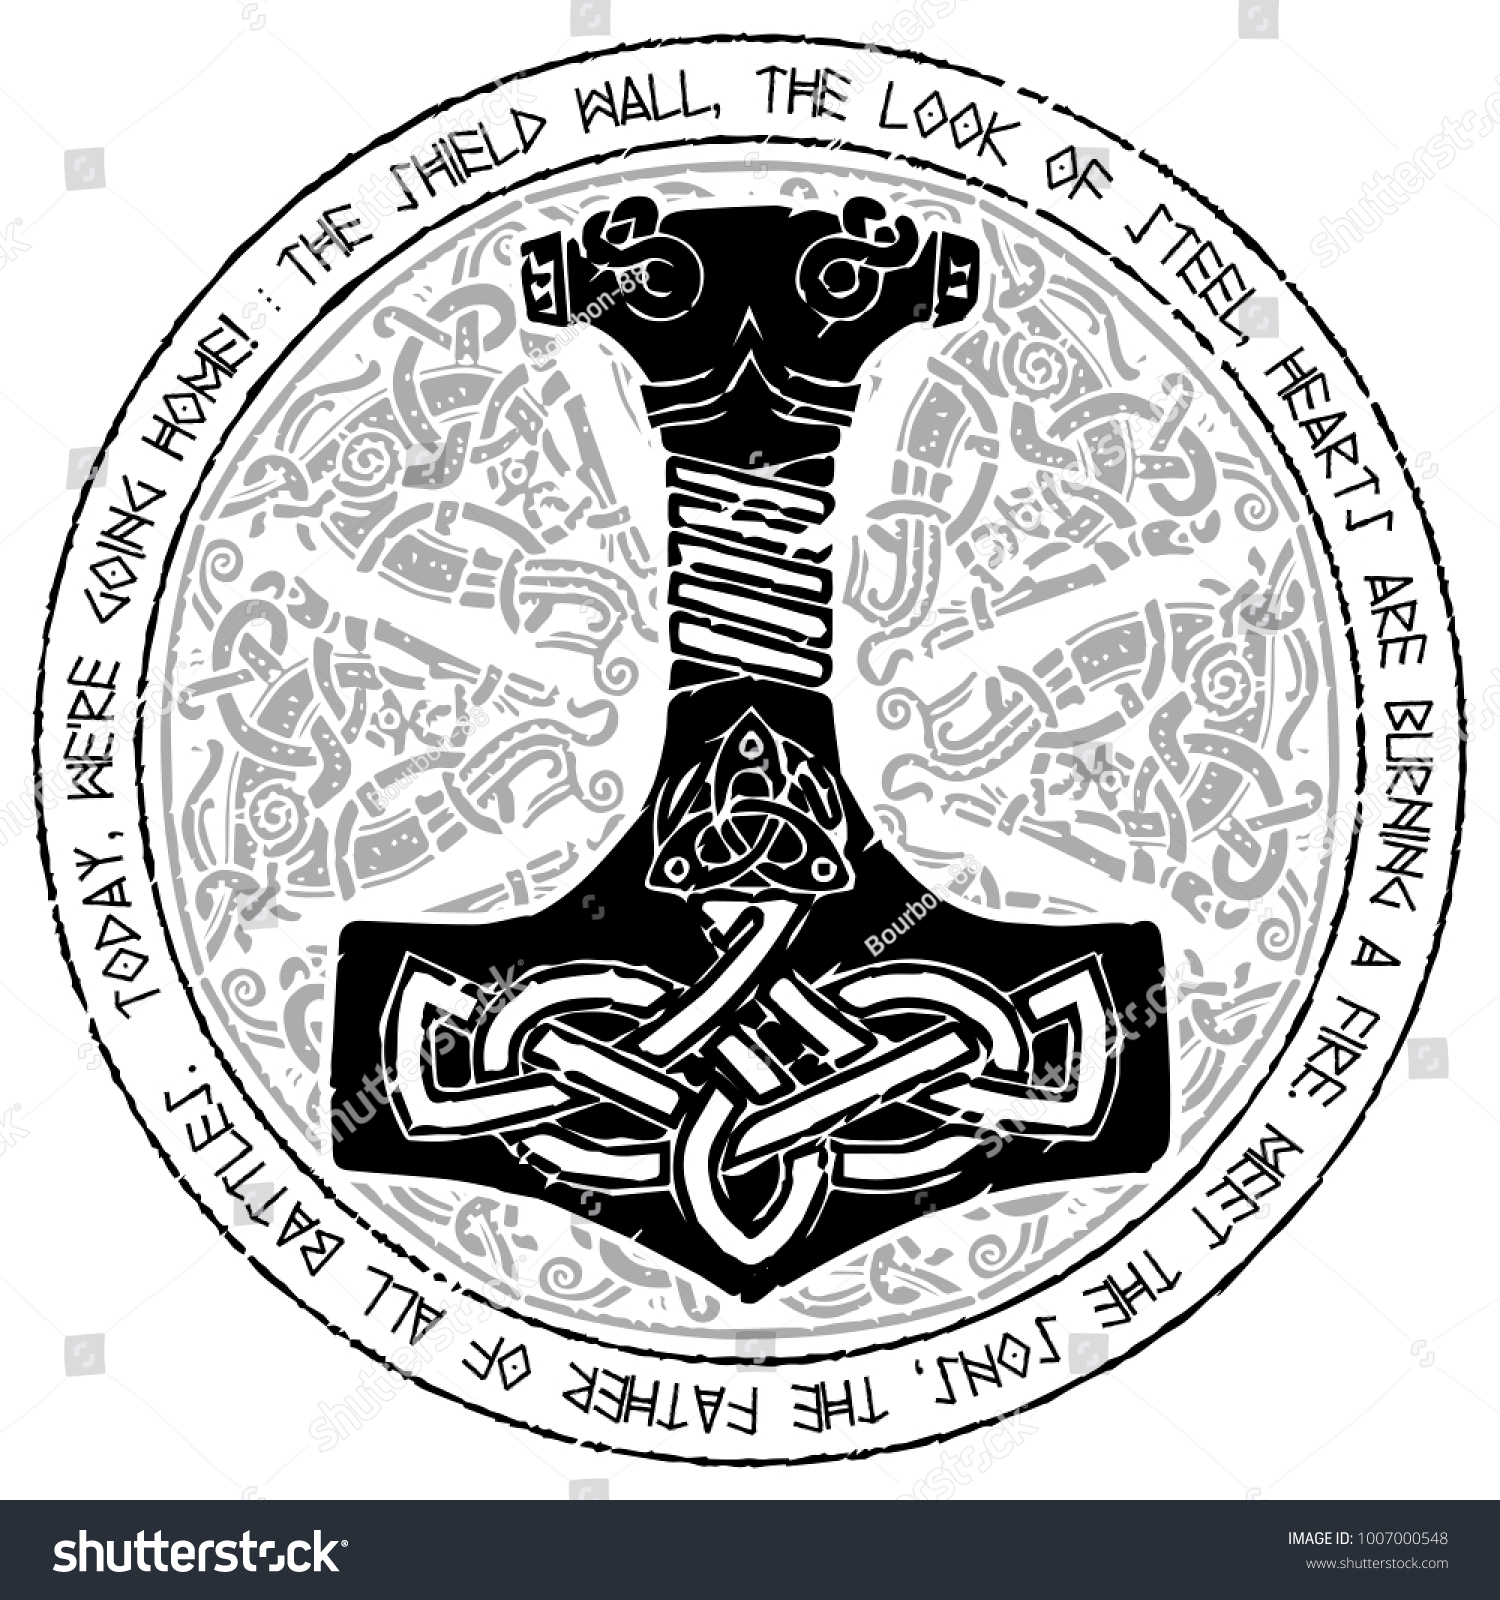 SVG of God Thor Hammer - Mjollnir. Round traditional Scandinavian ornament and runic text, isolated on white, vector illustration svg